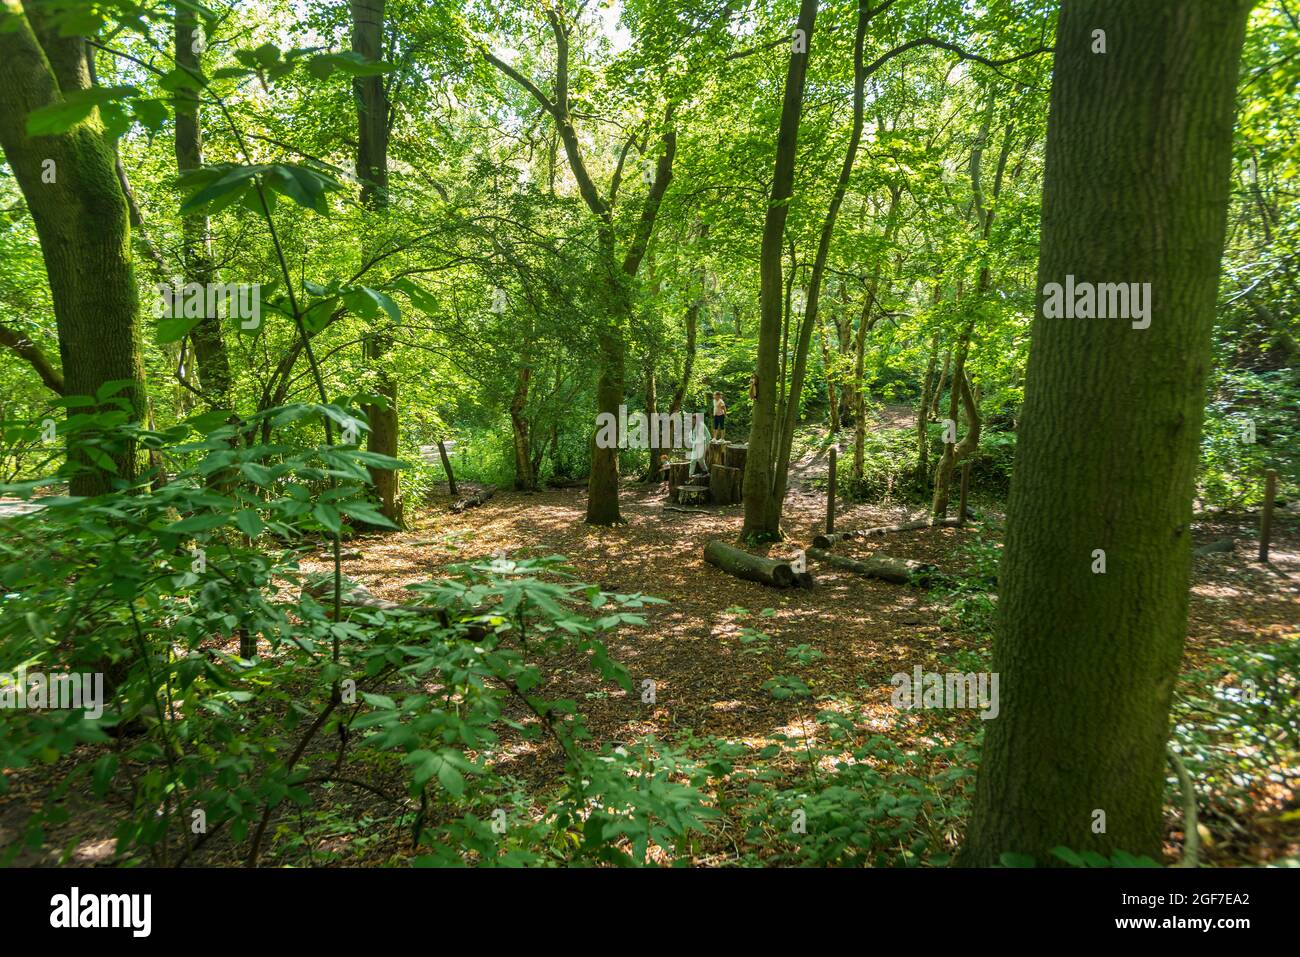 Runcorn Hill park childrens play area in a shady woodland setting. Stock Photo